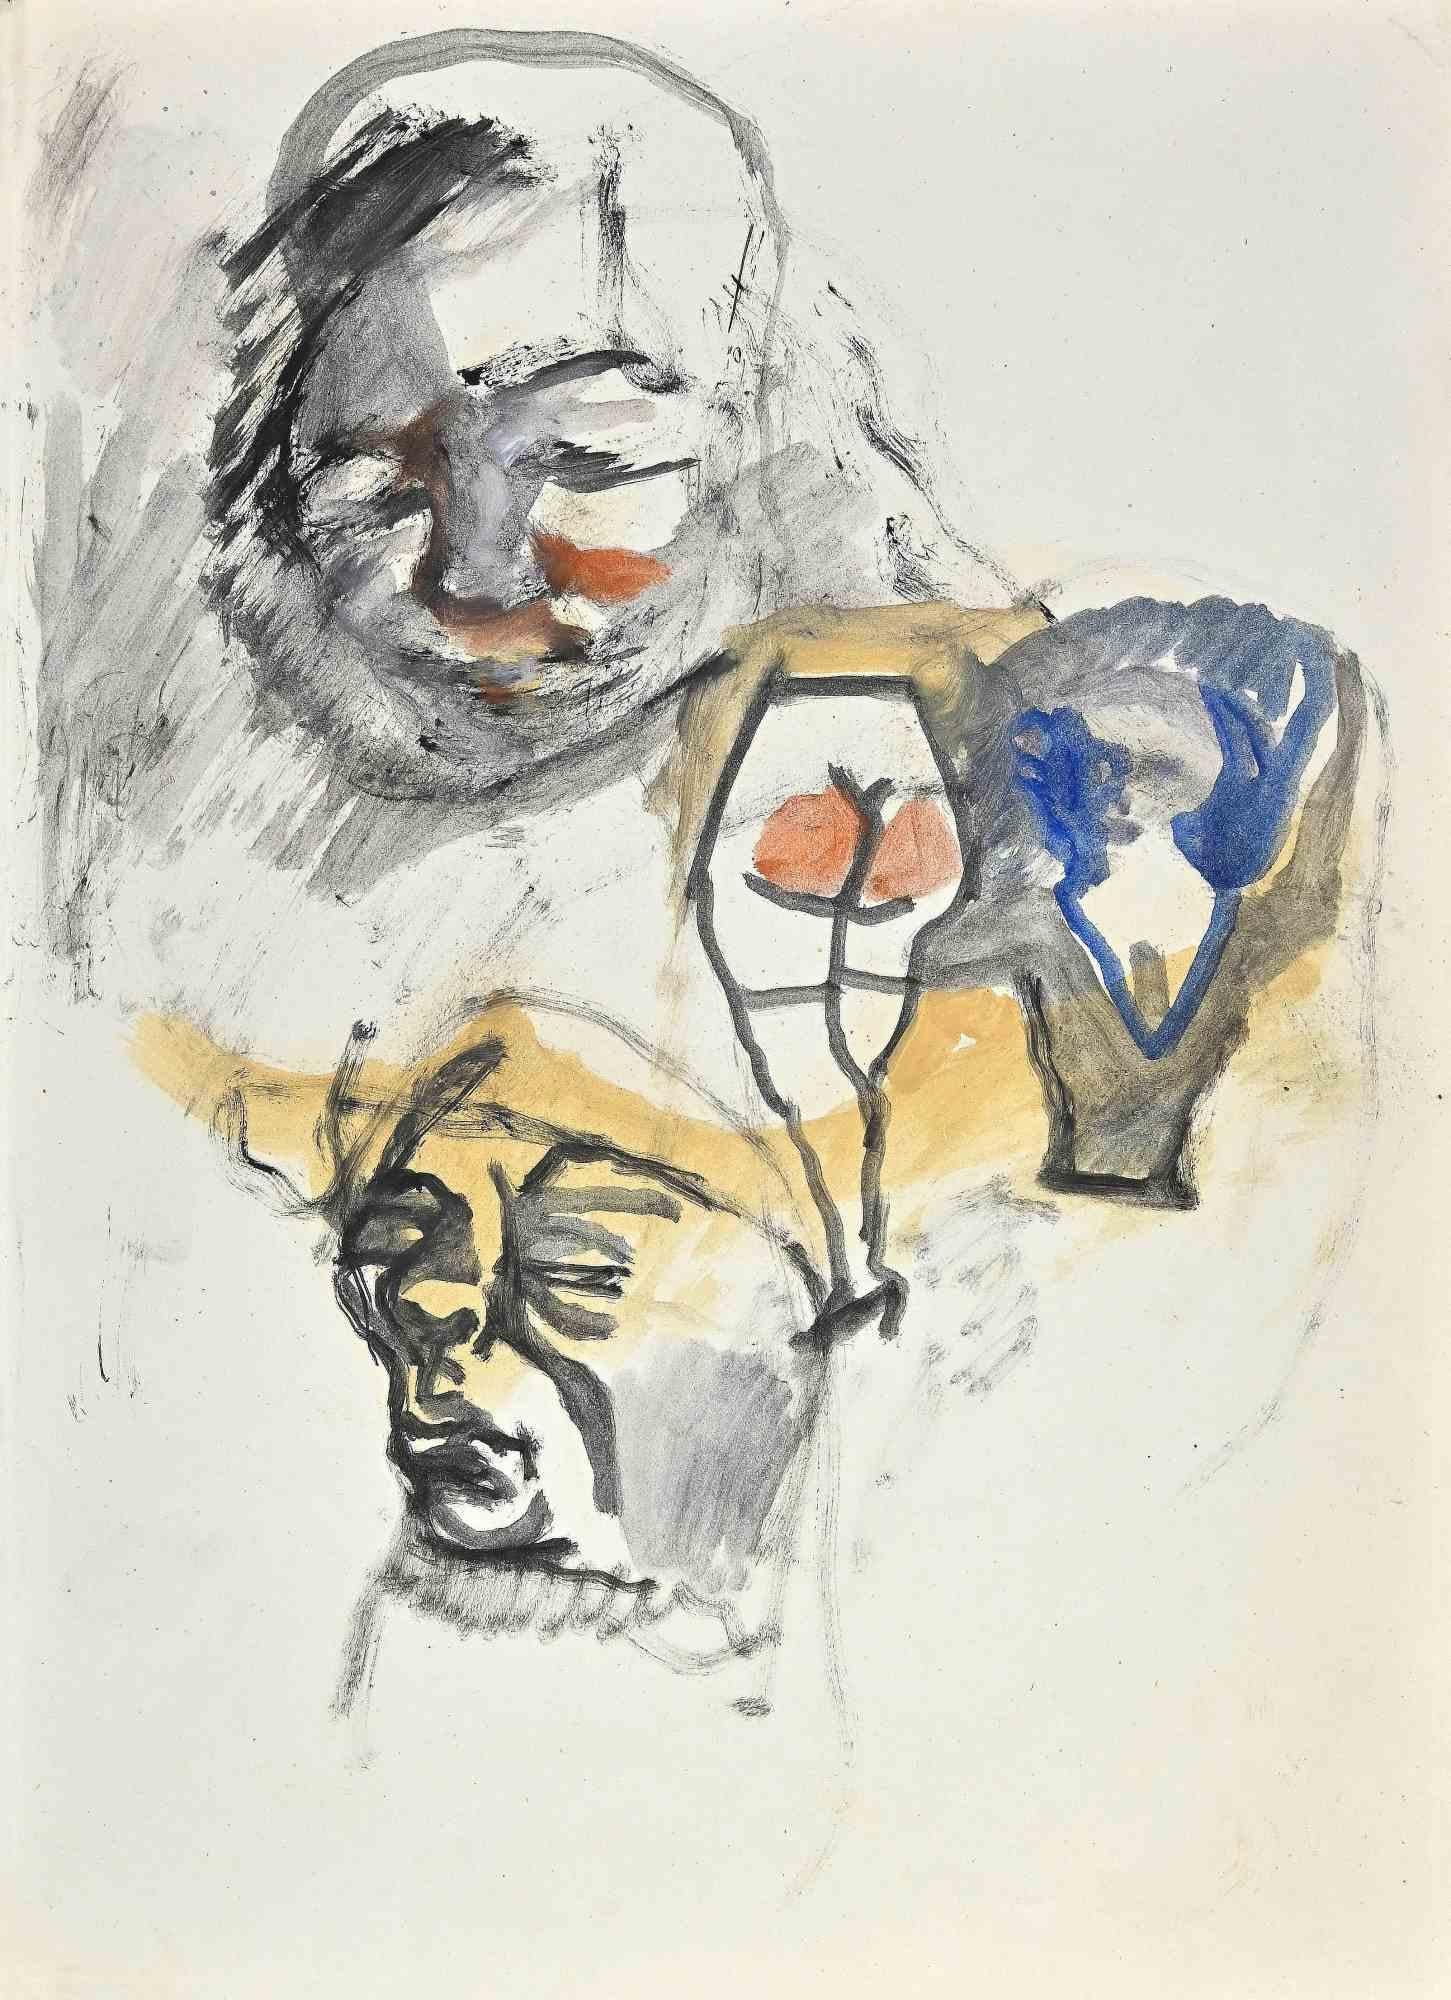 The Faces is an Original Drawing in ink and watercolor on cream-colored paper realized by Mino Maccari in the mid-20th century.

Good conditions.

Mino Maccari (1898-1989) was an Italian writer, painter, engraver, and journalist, winner the